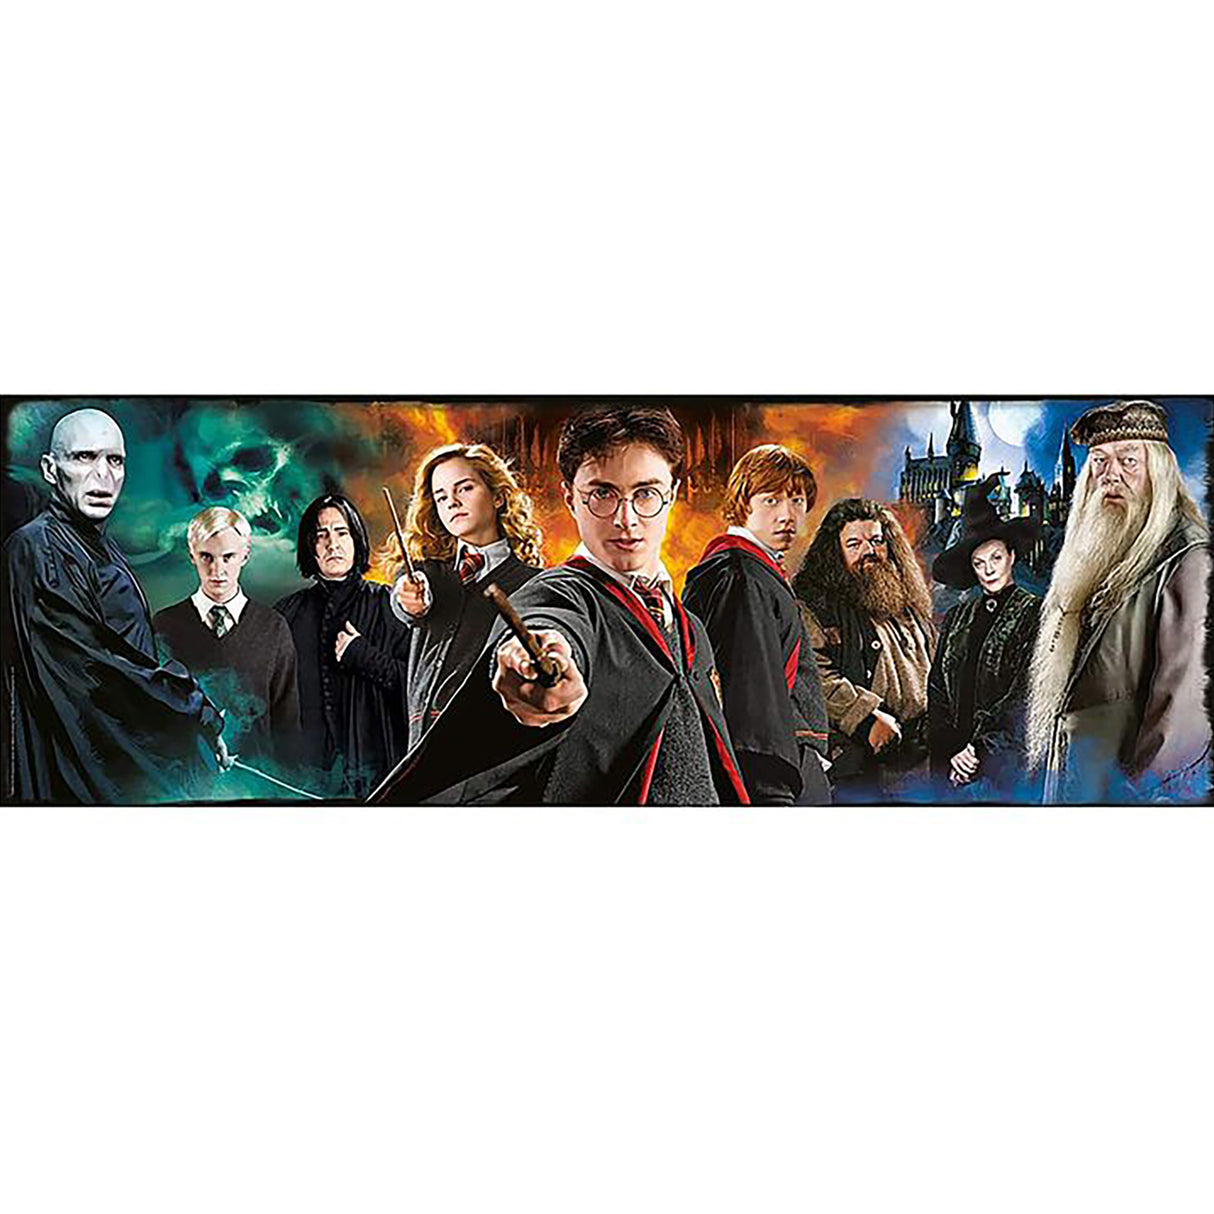 Clementoni Harry Potter and the Half Blood Prince Panorama Jigsaw Puzzle (1000 pieces)